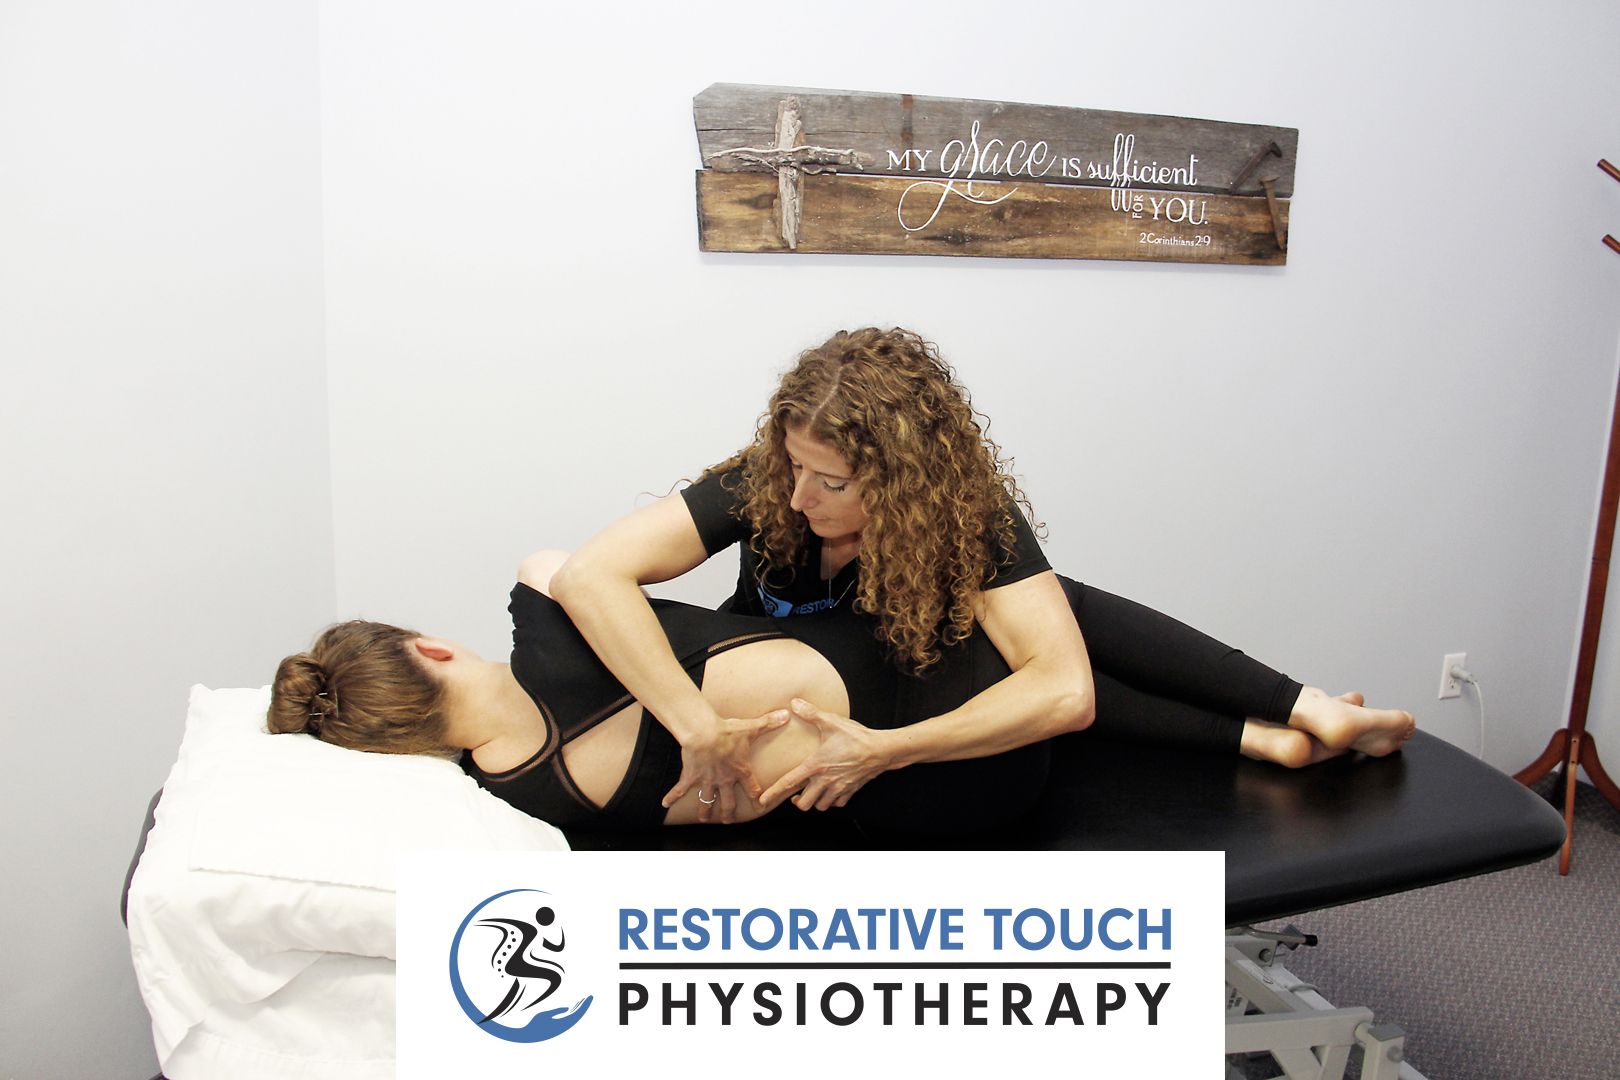 Hamilton Mountain Physiotherapy Clinic, Restorative Touch owner Marilena working on a patient's back while they are lying on their side on a table with the Restorative Touch Physiotherapy logo in the bottom center